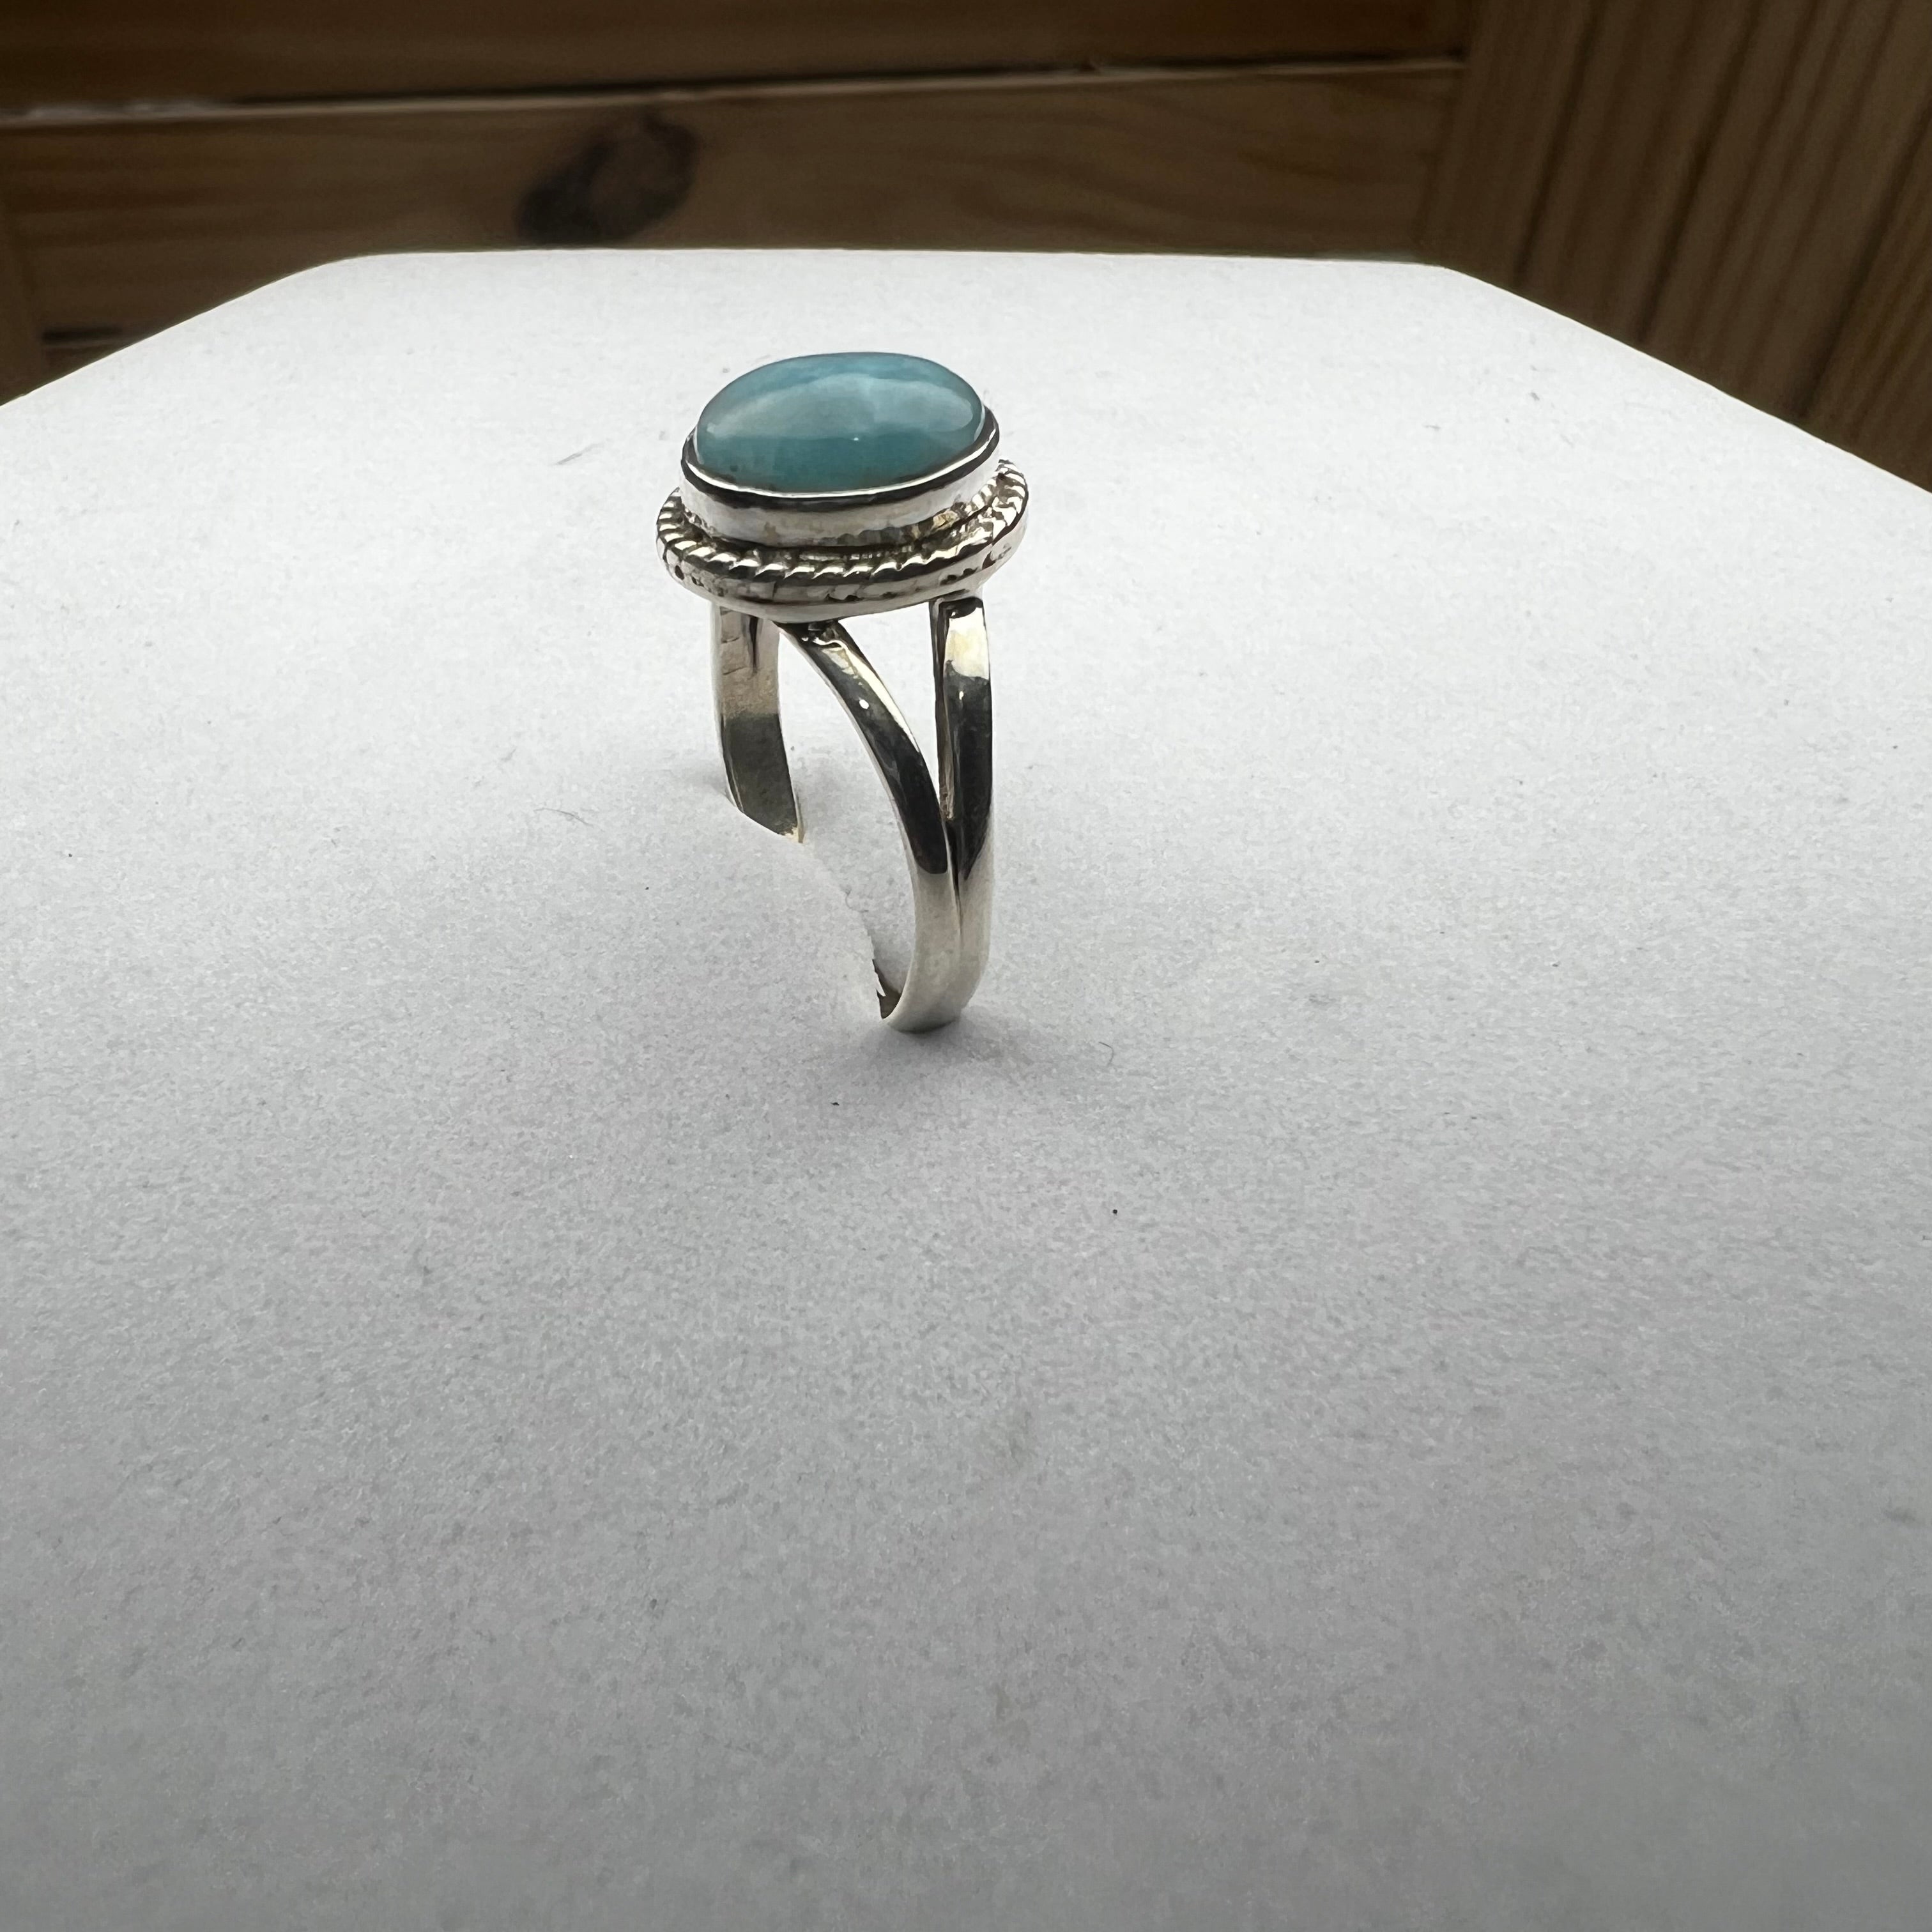 HANDCRAFTED LARIMAR RING IN
SILVER 925 (SIZE 6)